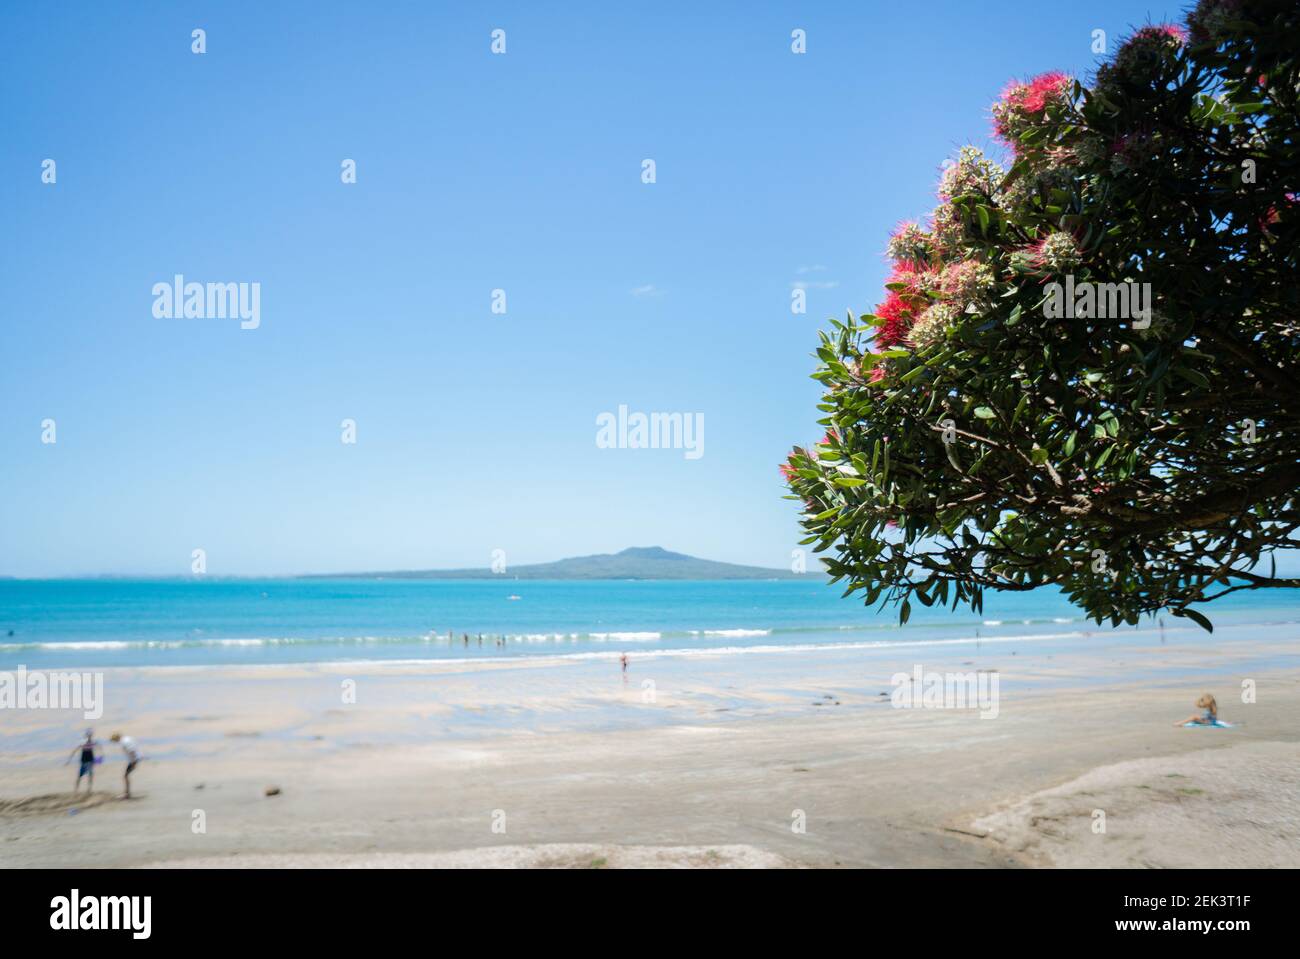 Pohutukawa tree which is also called New Zealand Christmas tree in full bloom at Takapuna beach, with blurred Rangitoto Island in the distance and peo Stock Photo